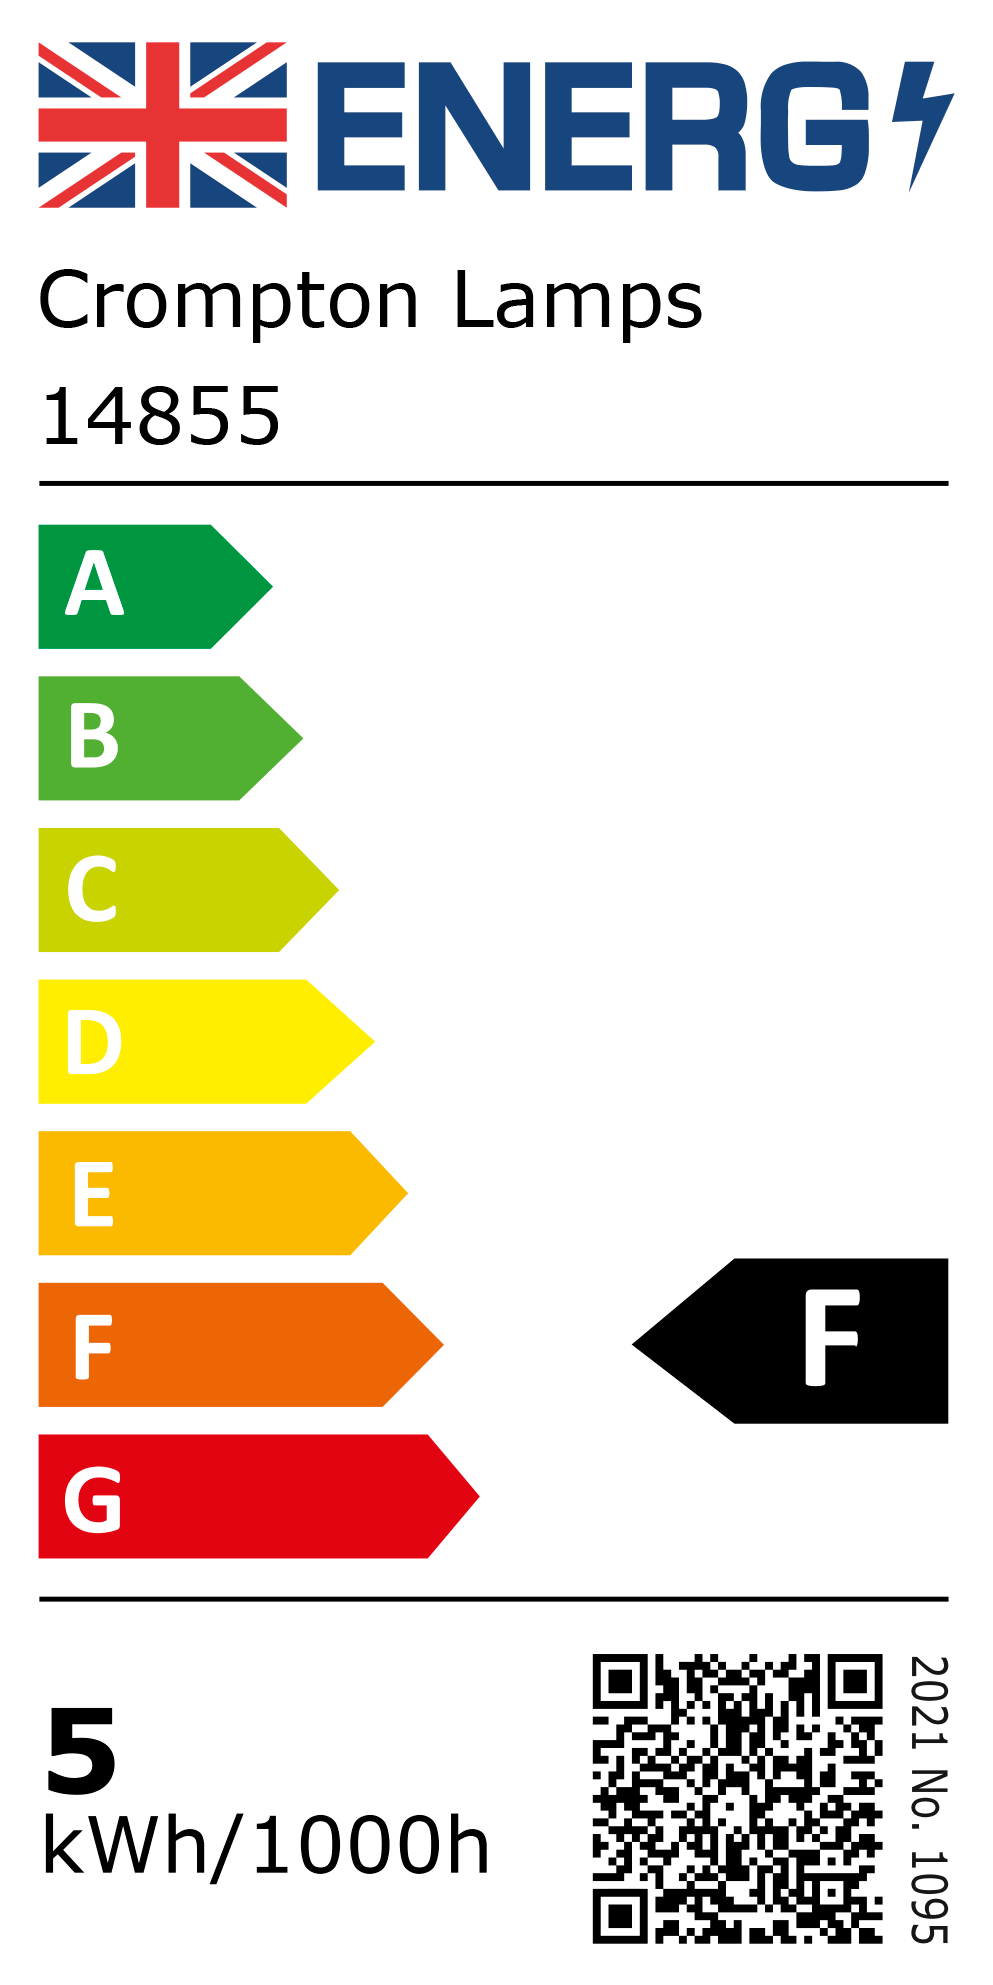 New 2021 Energy Rating Label: Stock Code 14855